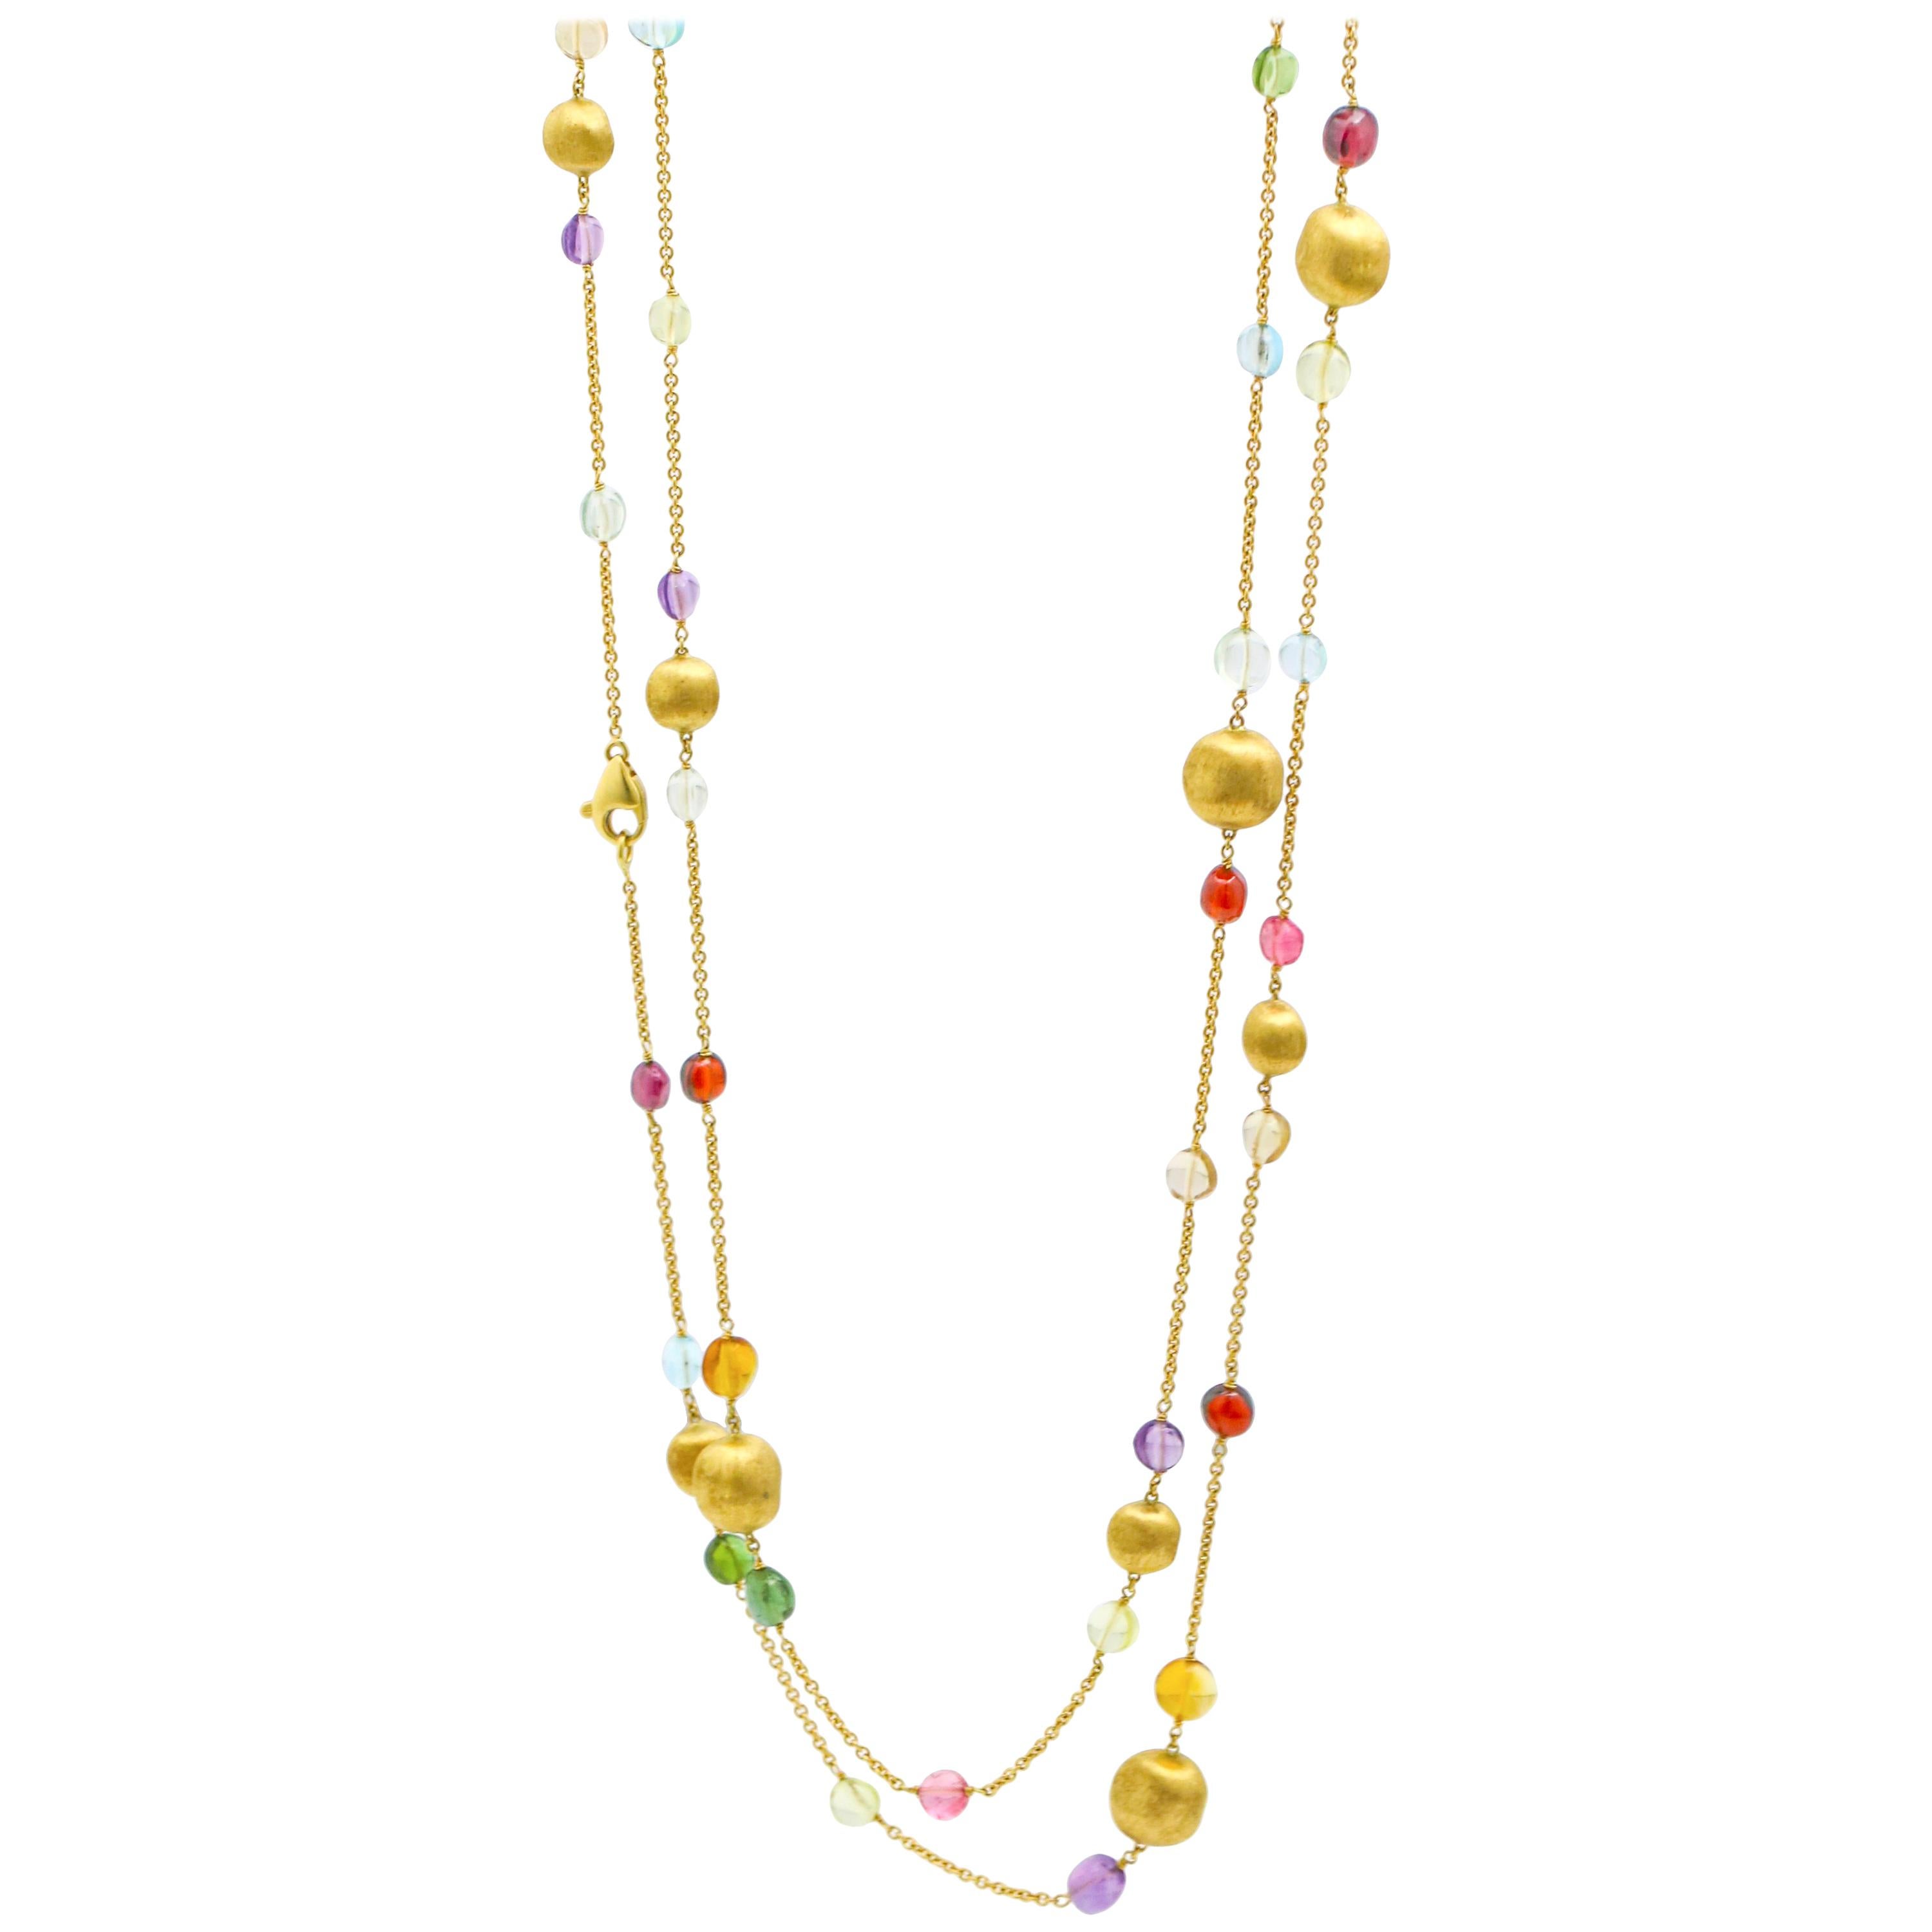 Marco Bicego 18K Yellow Gold and Multi-Colored Gemstone Long Statement Necklace